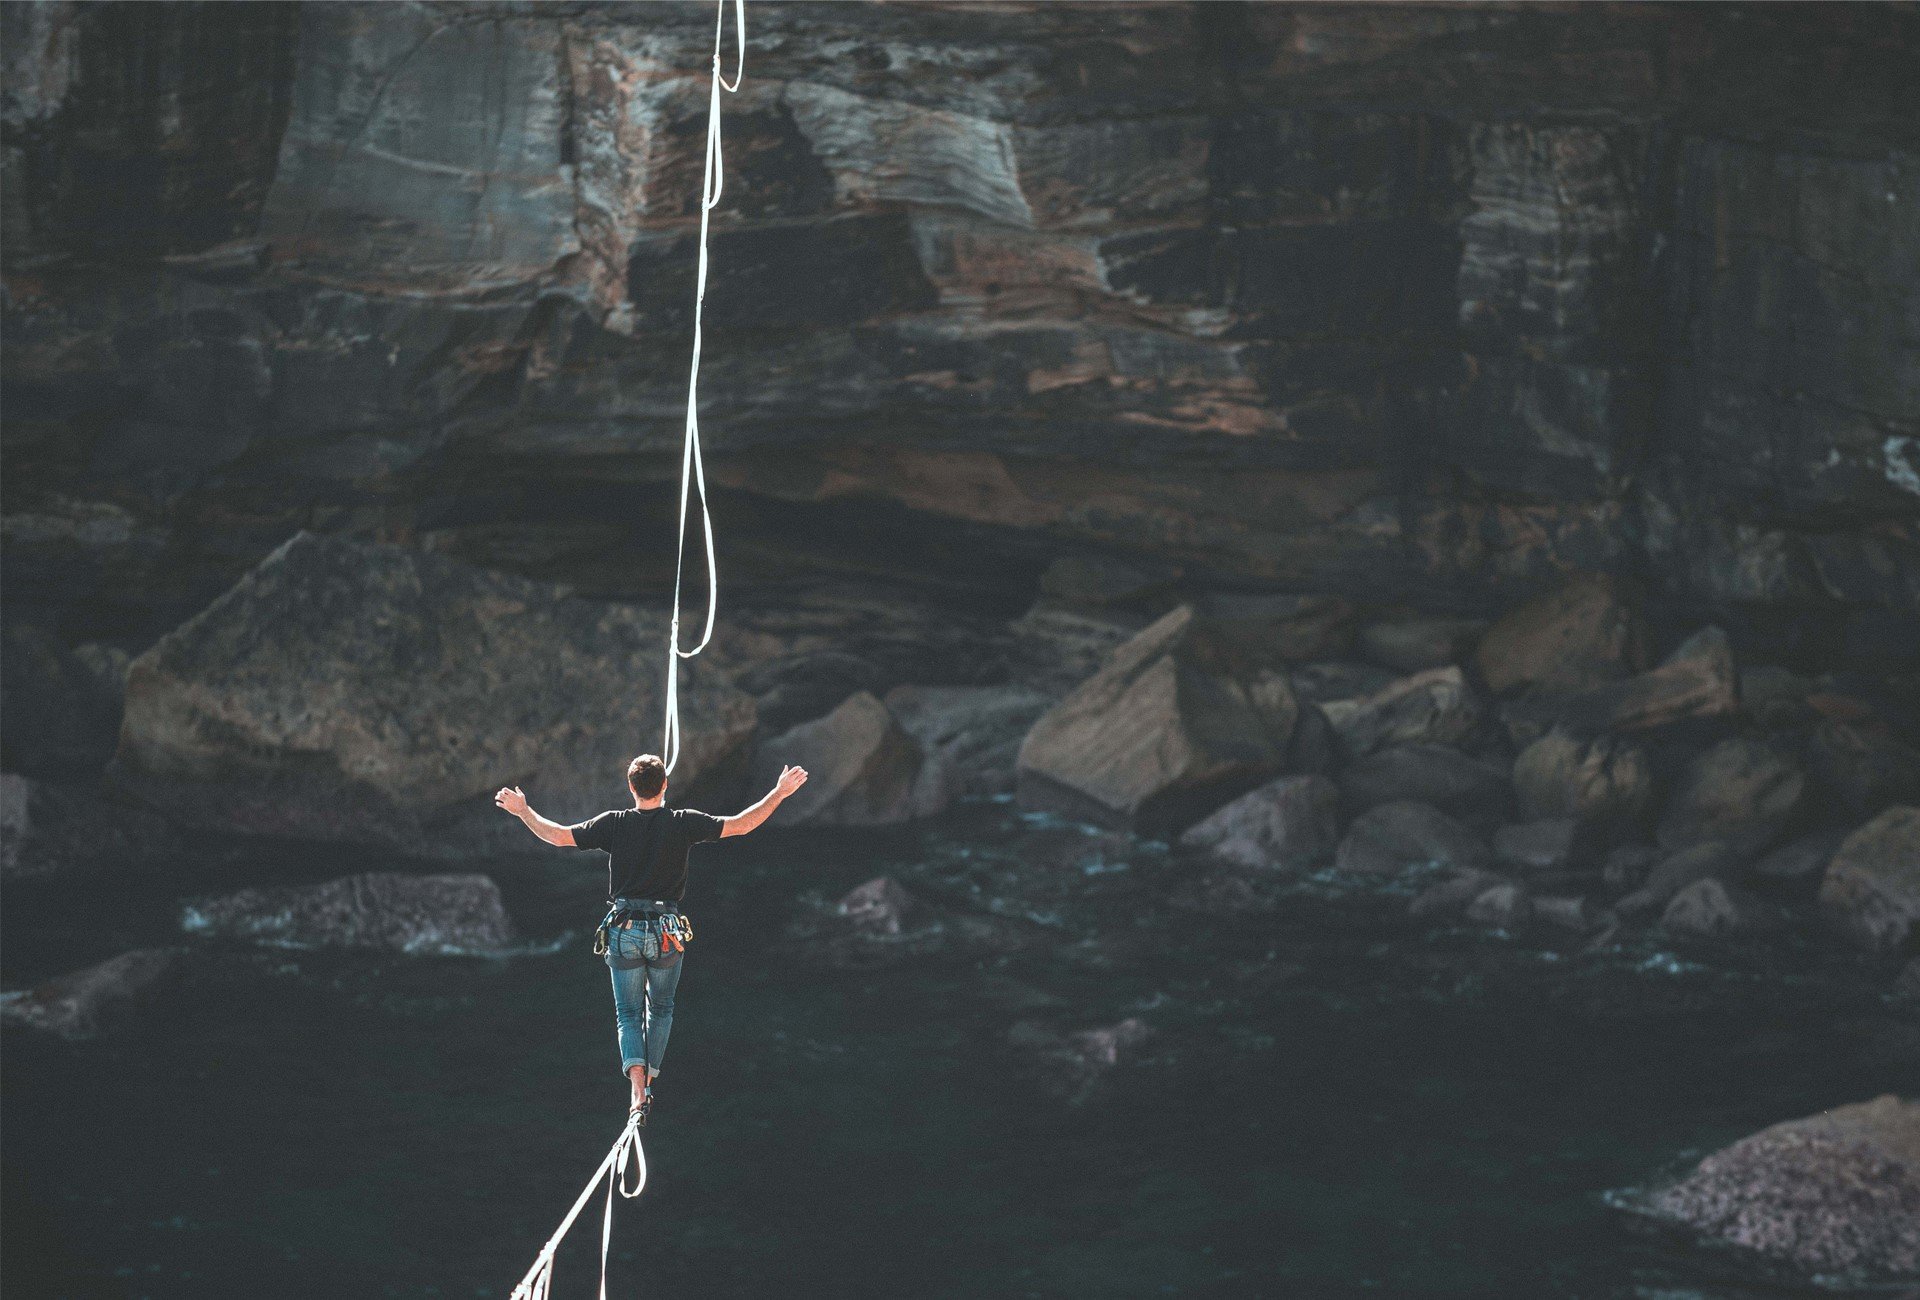 Man on tightrope over cliff edge and running water flip